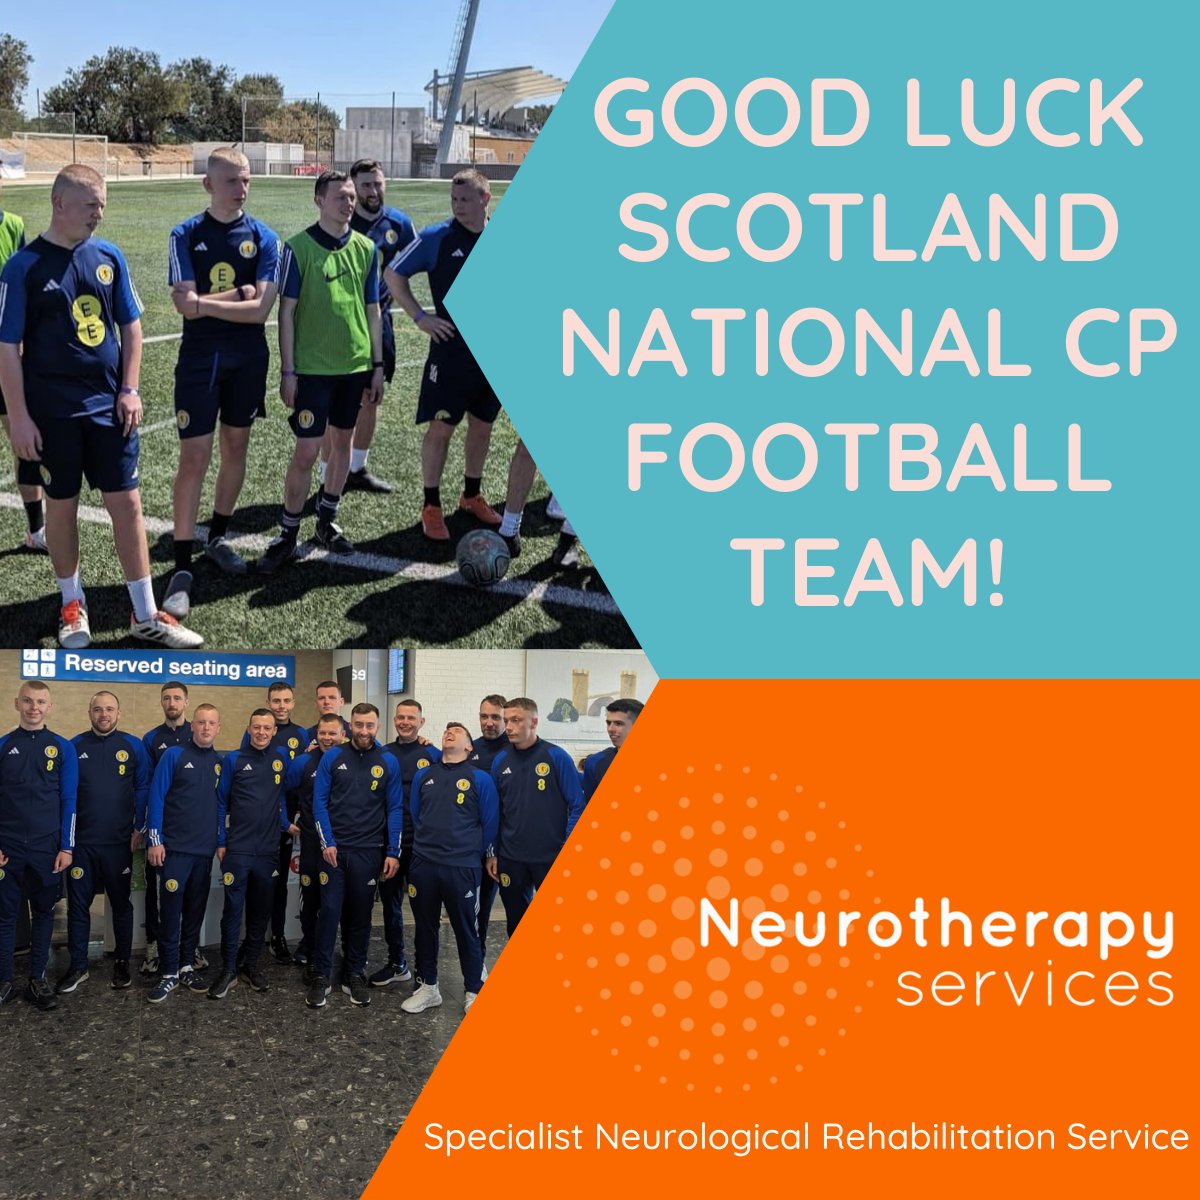 🏴󠁧󠁢󠁳󠁣󠁴󠁿⚽️MATCH DAY! Cheering on @CPFootball_SCO at #IFCPFWorldChamps ⚽️🏴󠁧󠁢󠁳󠁣󠁴󠁿 Good luck today Kerr and the team! ⚽️ Watch live on IFCPF'S YouTube 11am. Go Scotland! ⚽️#ScotlandFootball#2024WorldChamps